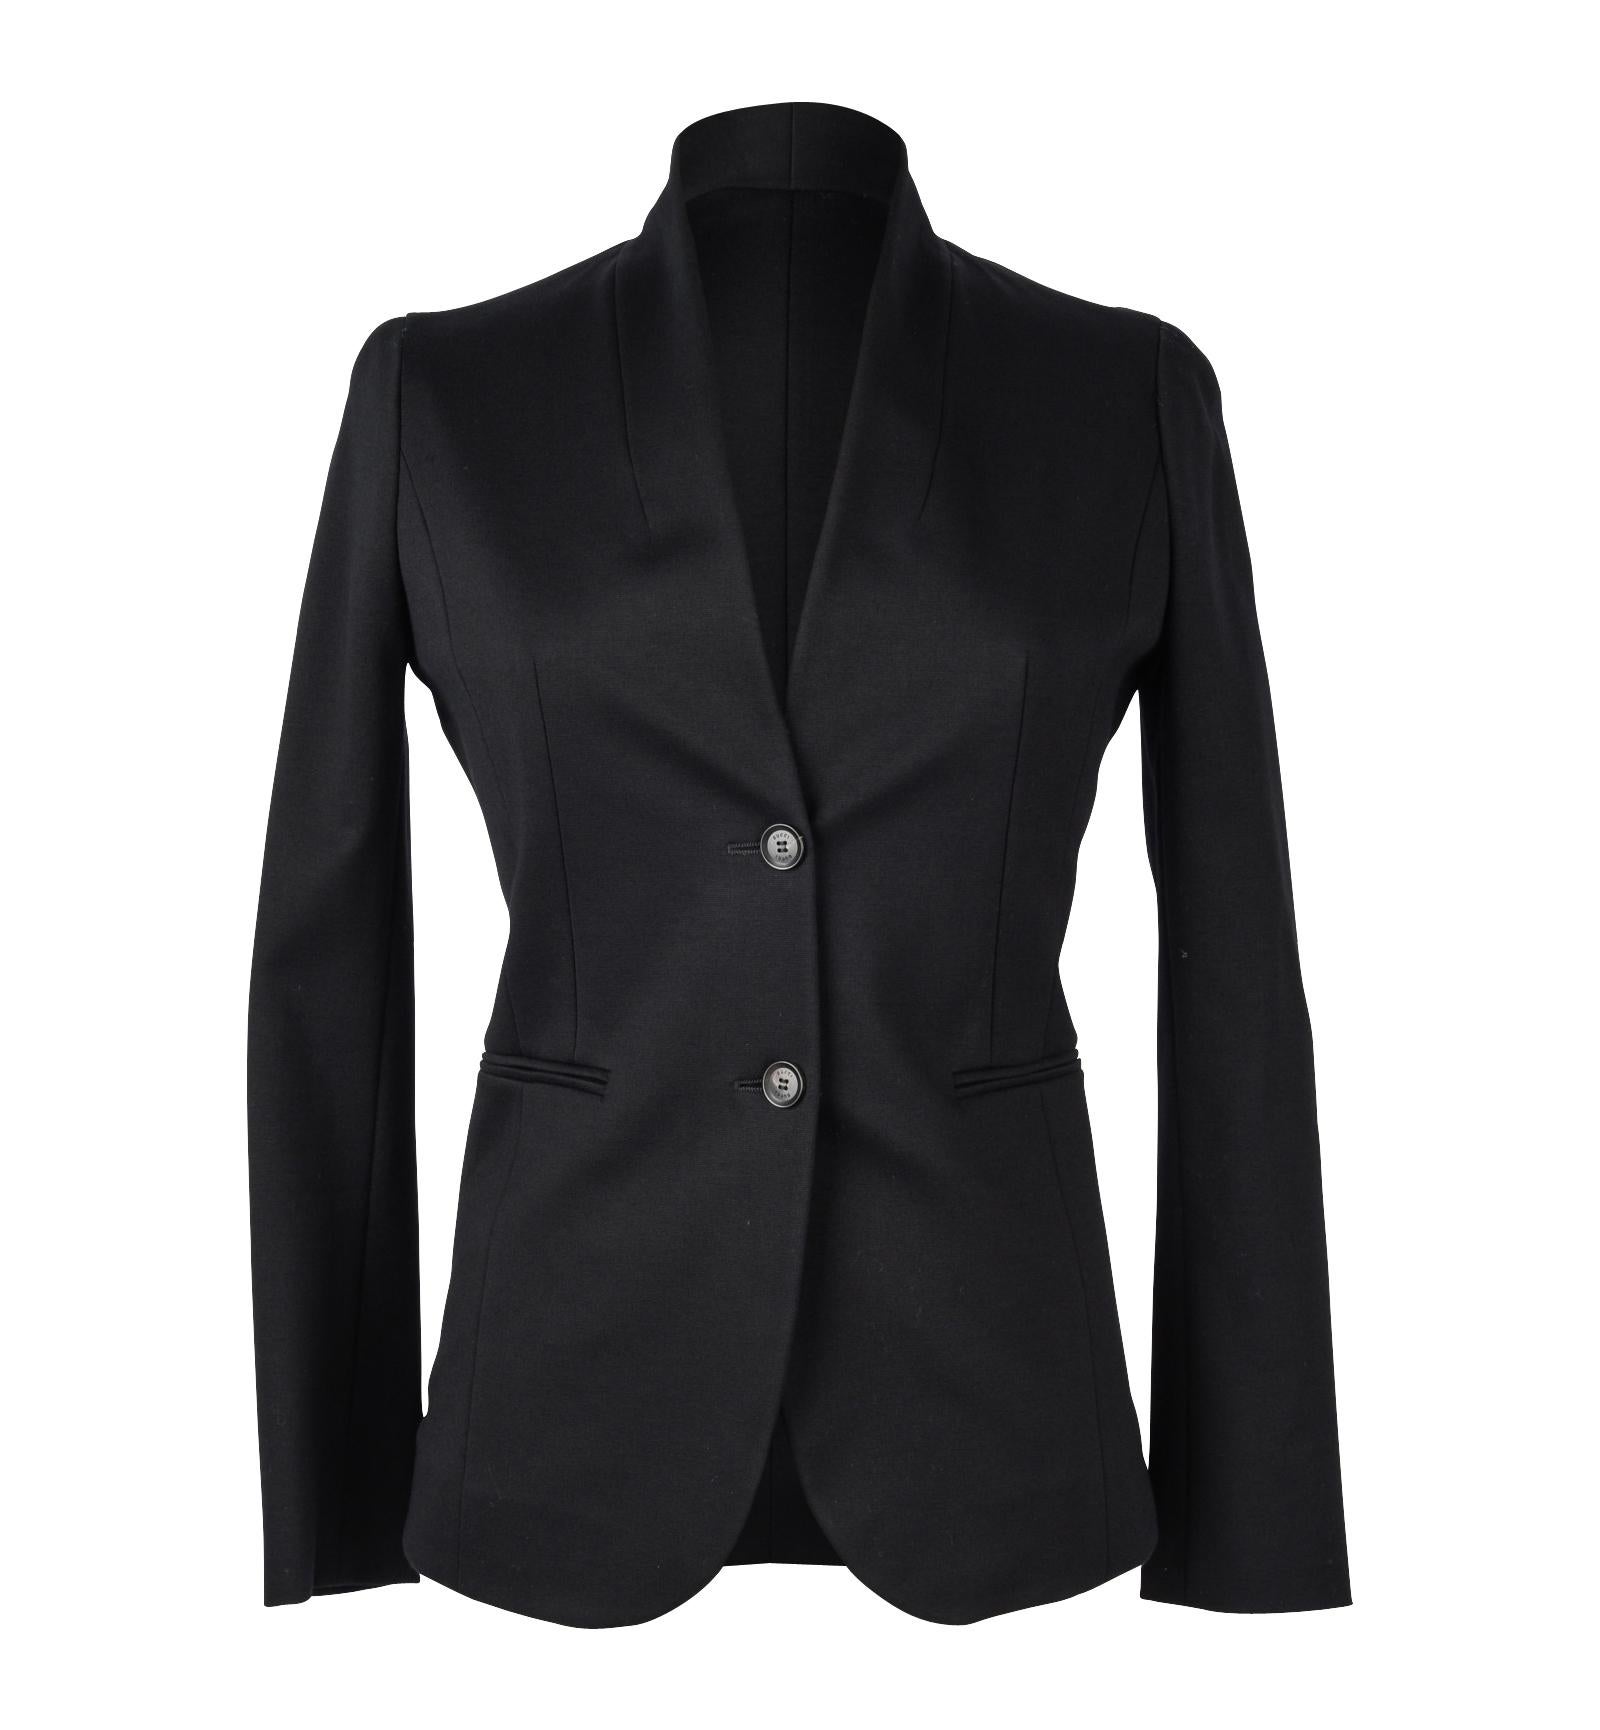 Guaranteed authentic Gucci modern, sleek shaped black jacket.
Faux lapel 2 button single breast
Faux slot pockets.  
Perfect go to black blazer!
Upper rear and arms are lined.
Fabric content is missing - feels like a wool blend.  Fabric has